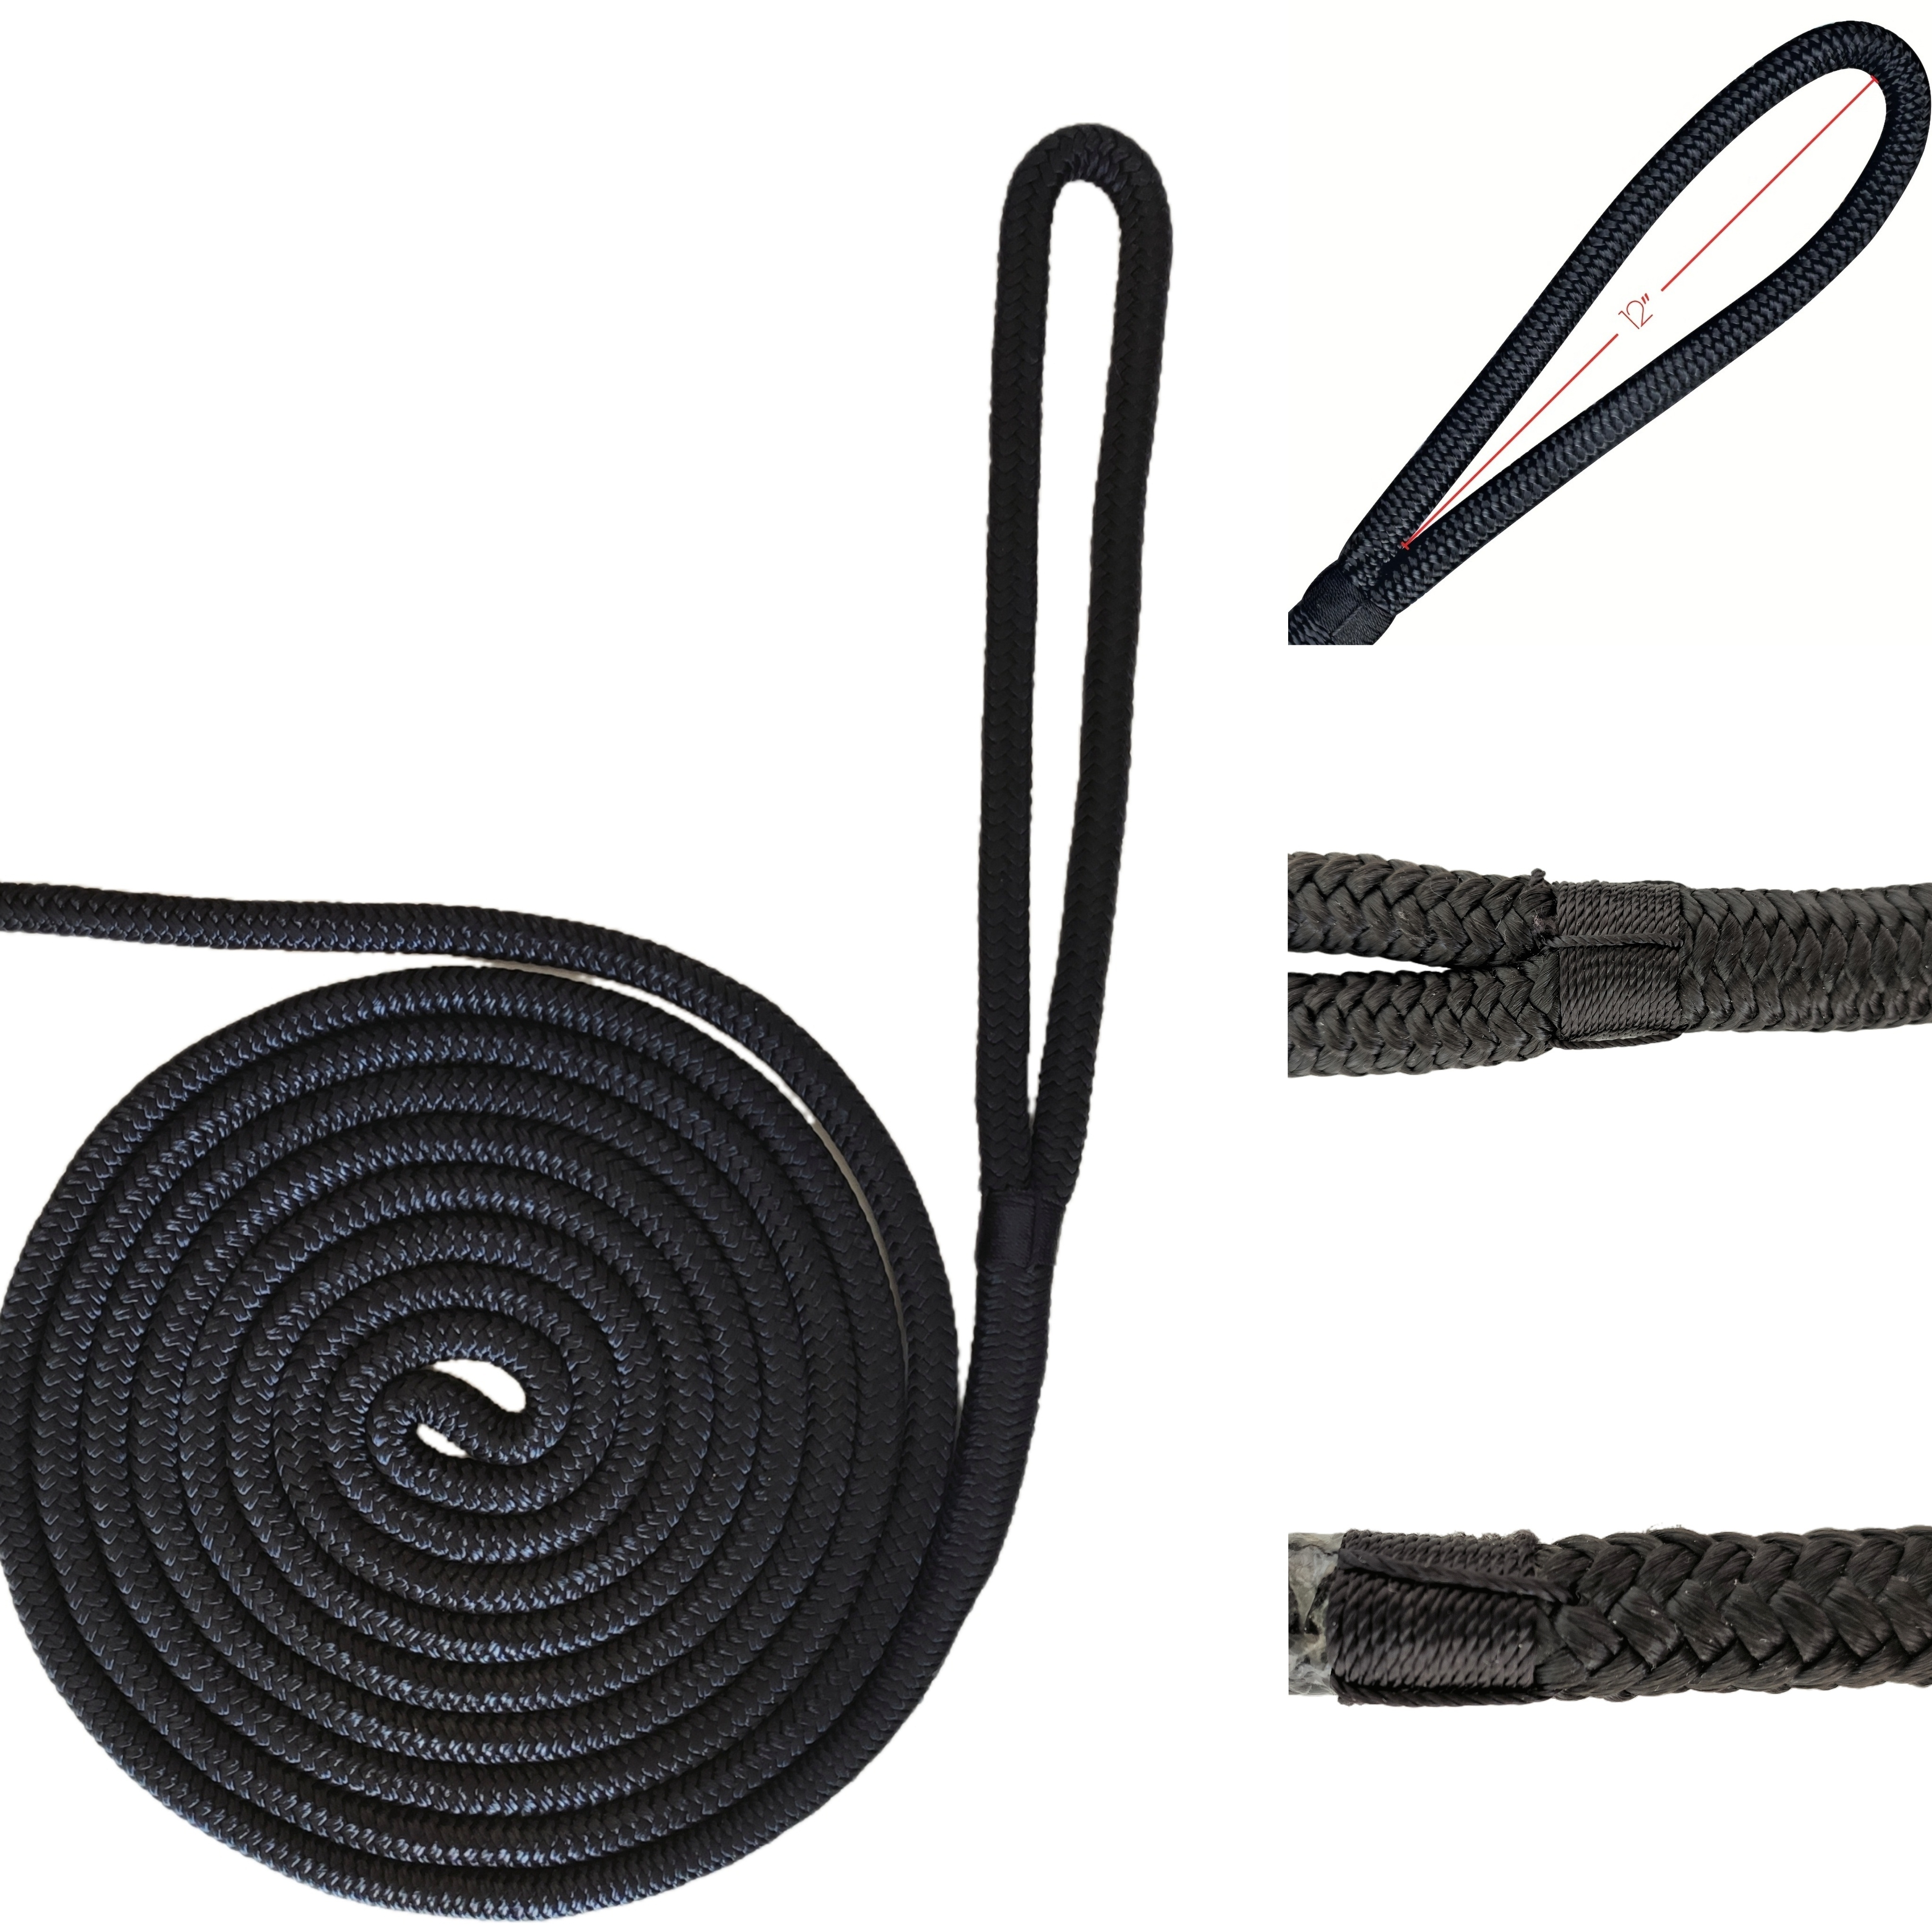 

Ultra-strong 4400lb Double Braided Nylon Dock Line, 3/8in X 20ft - Durable & Flexible For Secure Anchoring